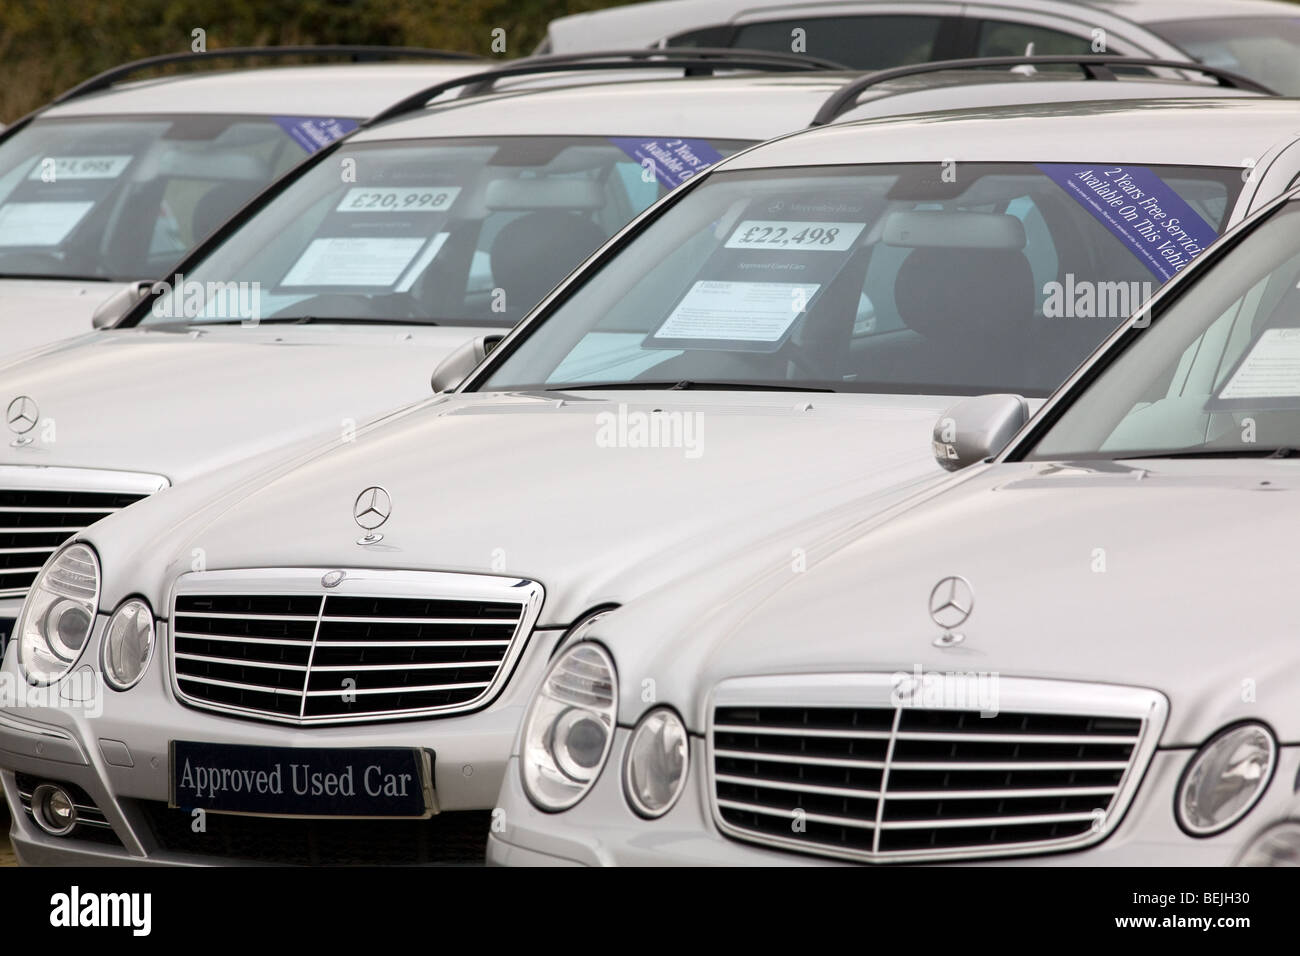 Mercedes Benz Used Cars On A Dealers Forecourt Stock Photo